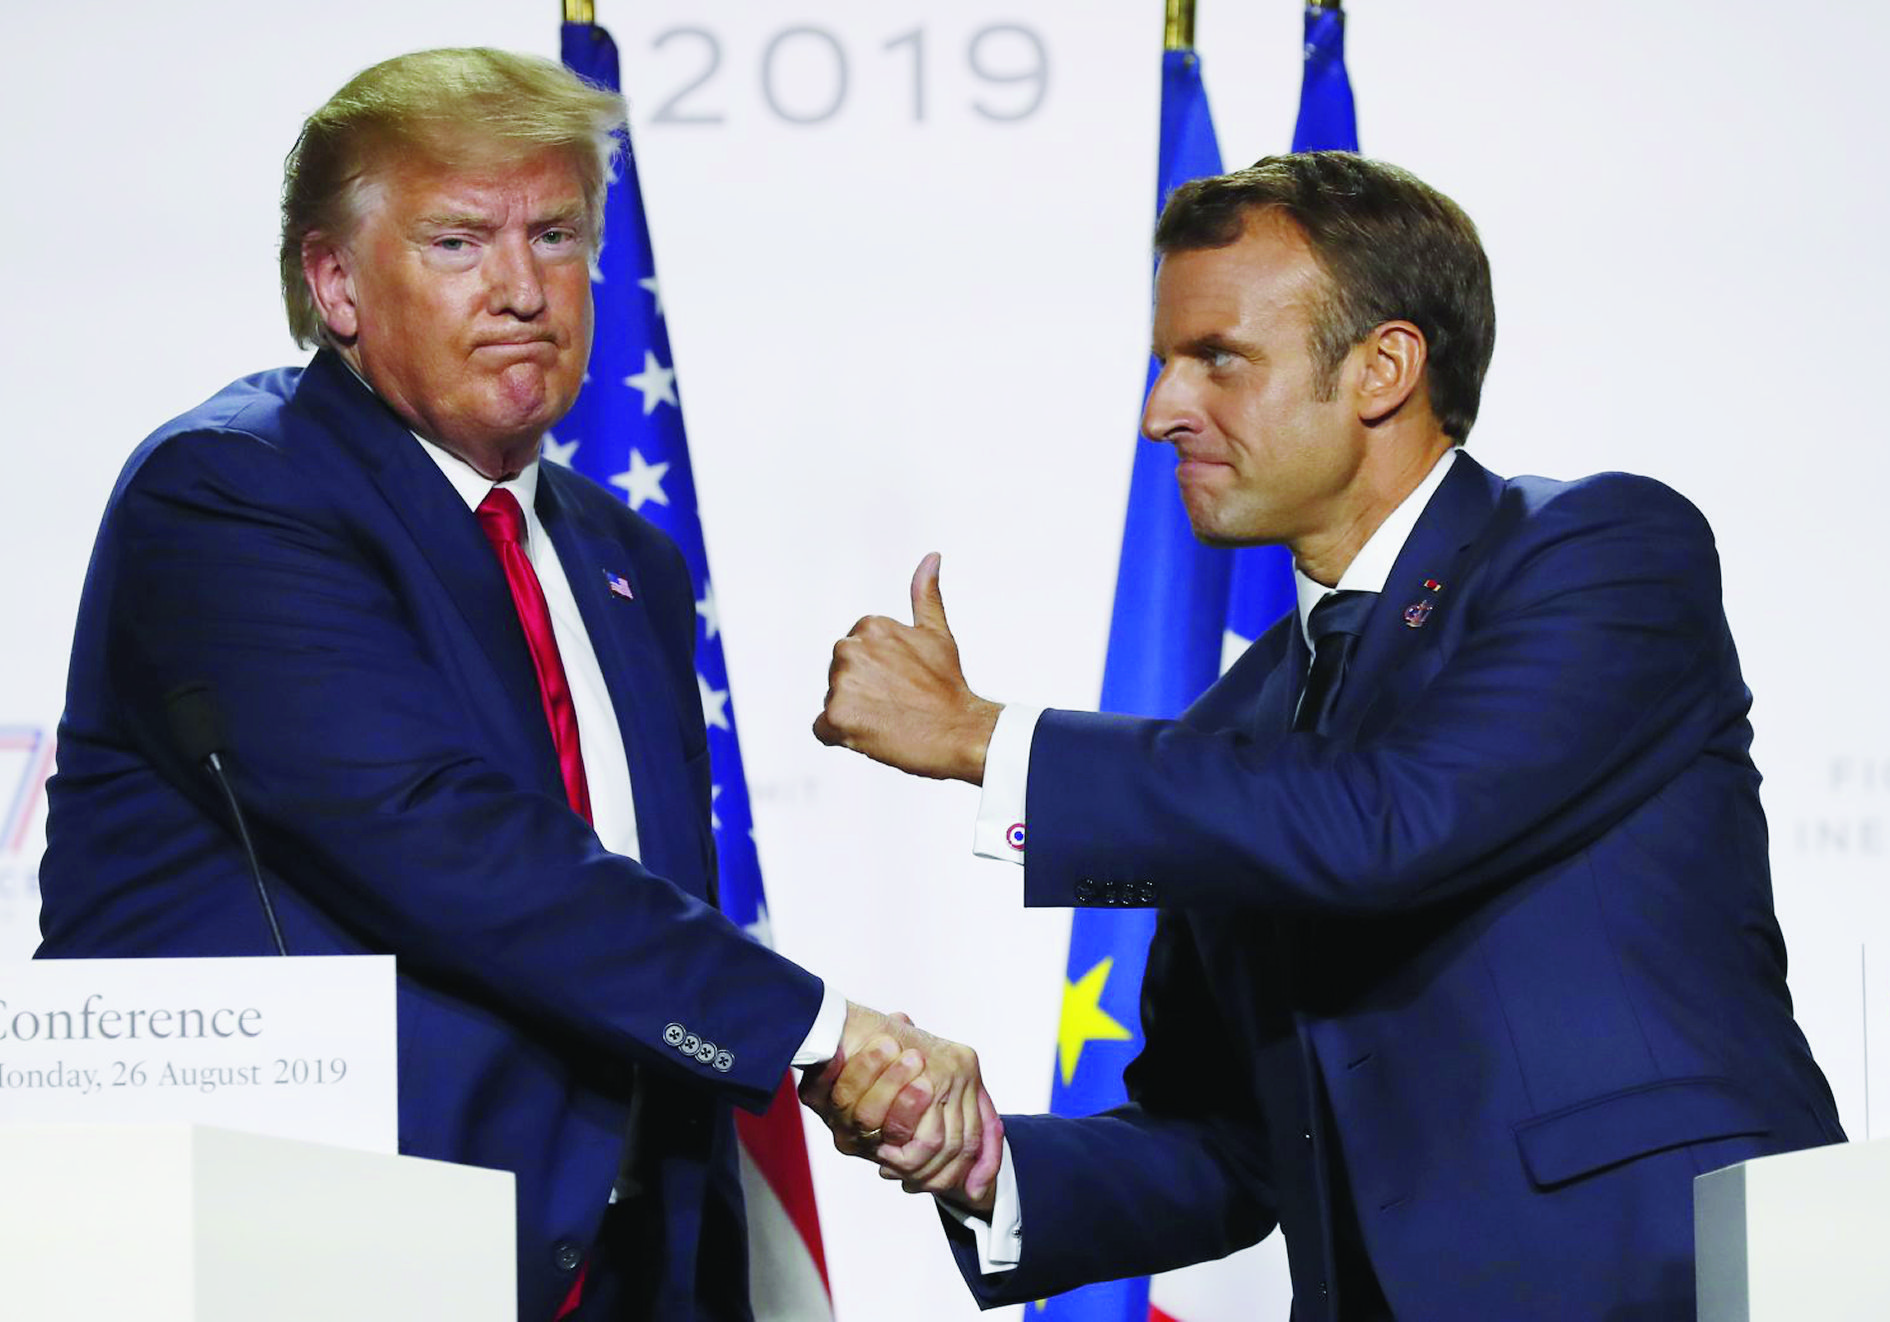 French President Emmanuel Macron and U.S President Donald Trump shake hands during the final press conference during the G7 summit Monday, Aug. 26, 2019 in Biarritz, southwestern France. French president says he hopes for meeting between US President Trump and Iranian President Rouhani in coming weeks. (AP Photo/Francois Mori) APTOPIX France G7 Summit